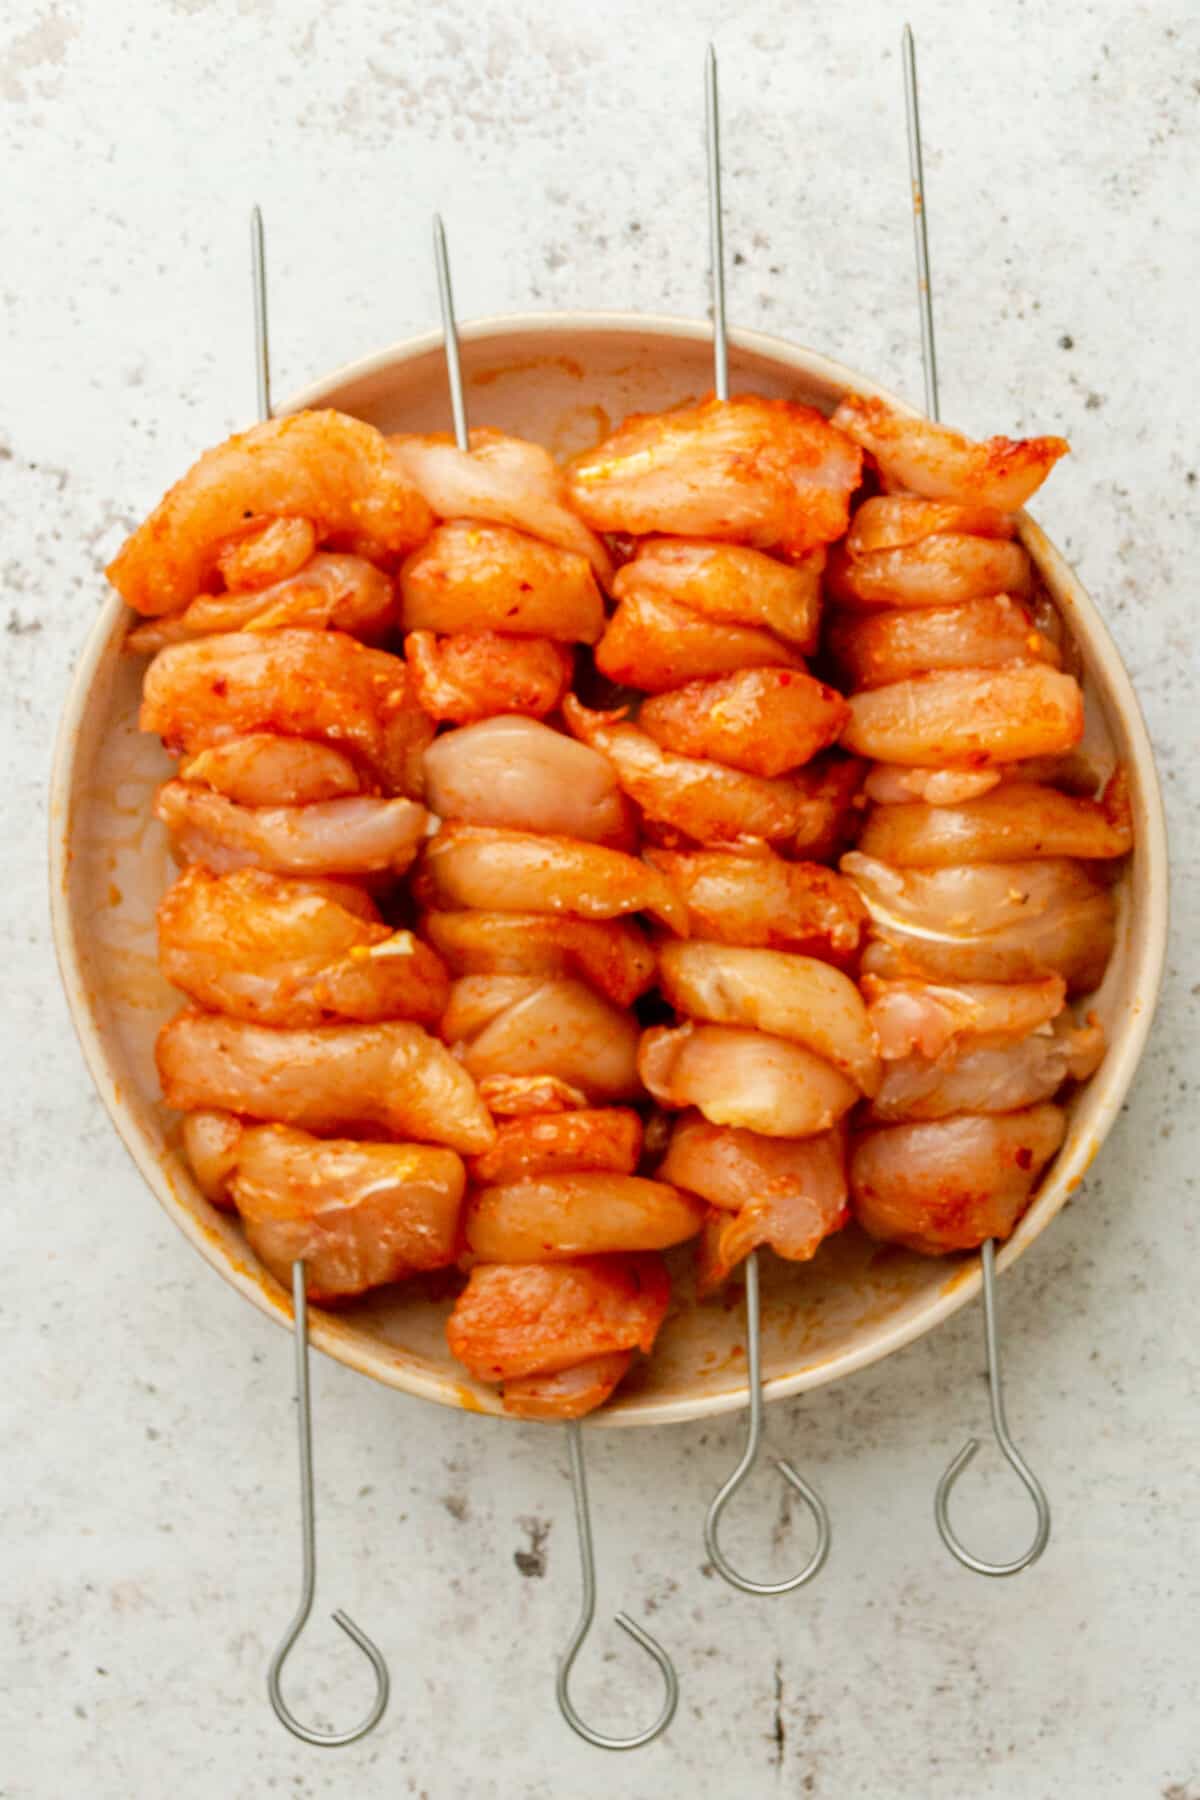 Skewers of spiced chicken tenders sit on top of a shallow ceramic bowl on a light grey surface.